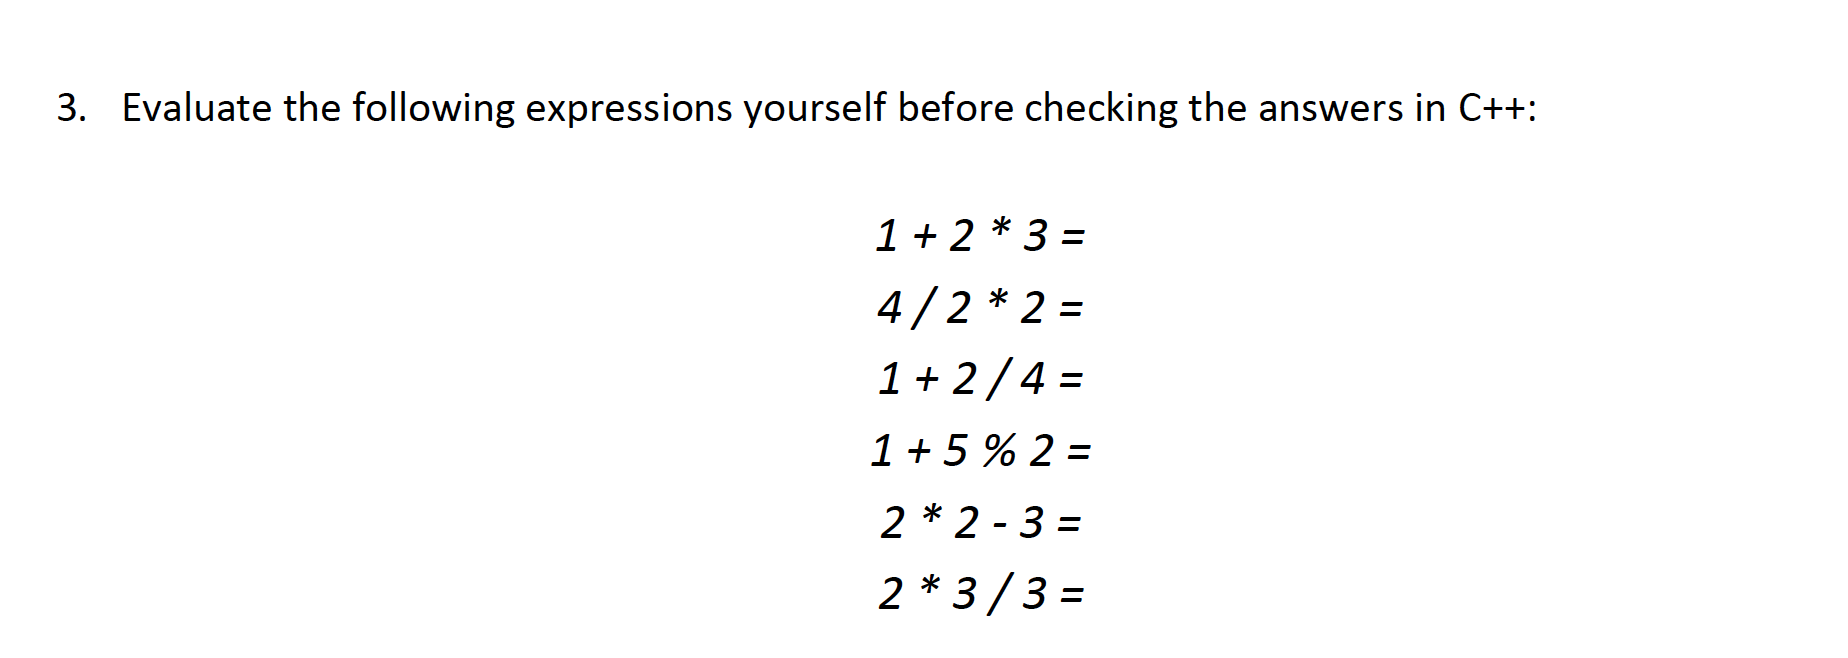 3. Evaluate the following expressions yourself before checking the answers in C++:
1 + 2 * 3 =
4/2 * 2 =
%3D
1+ 2/4 =
1 + 5 % 2 =
2 * 2 - 3 =
2 * 3/3 =
%3D
